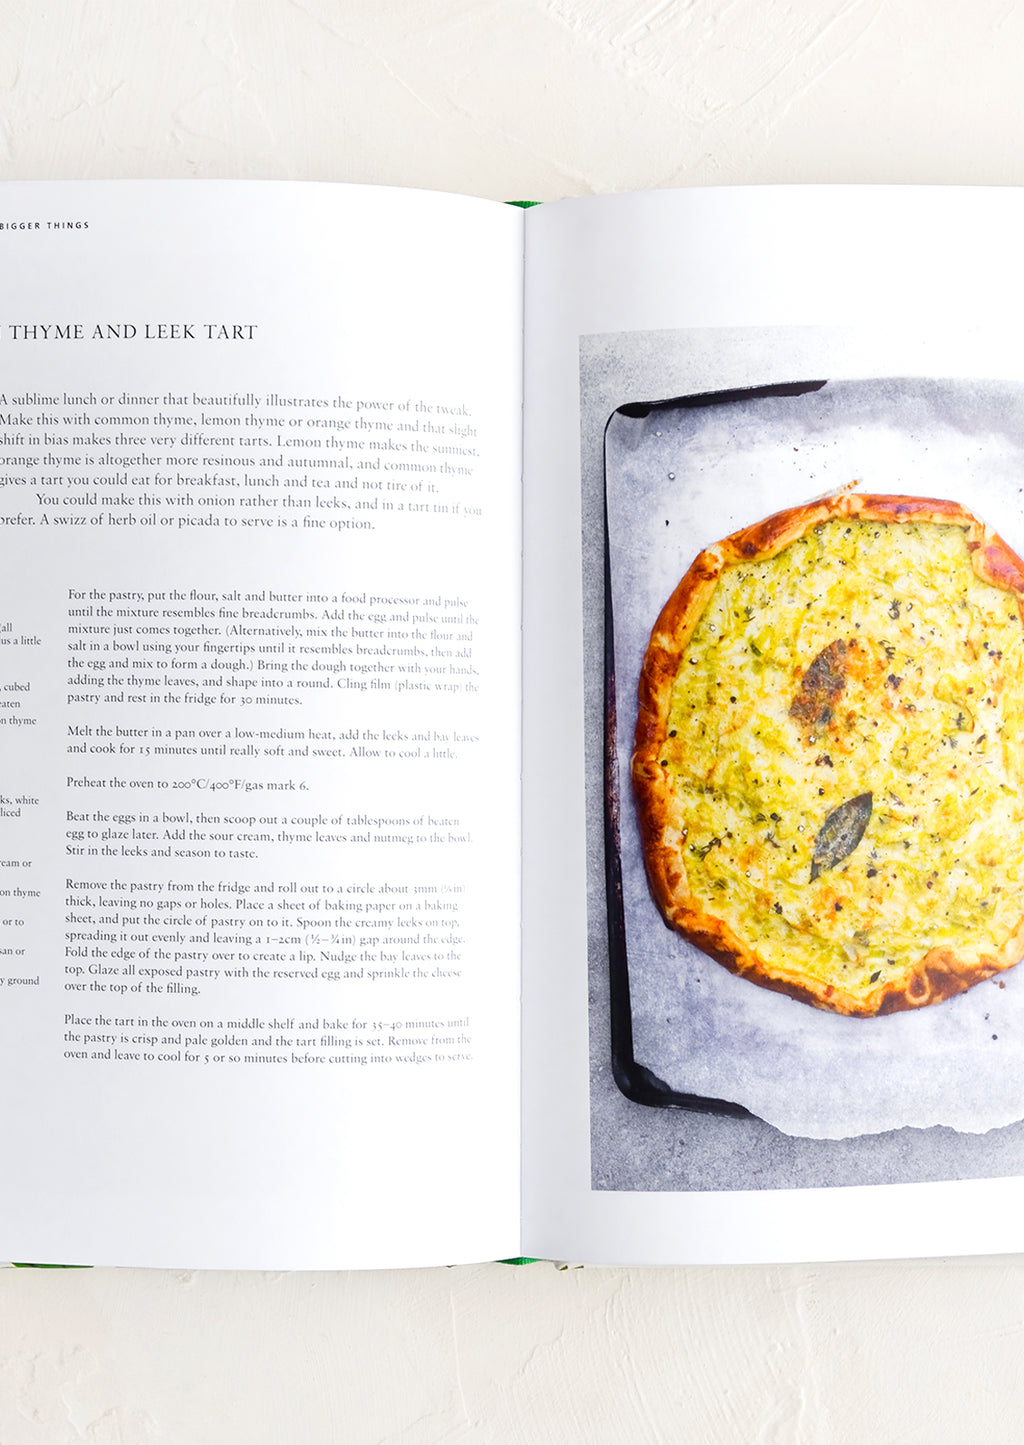 3: A page in a book with a recipe for a lemon and leek tart.